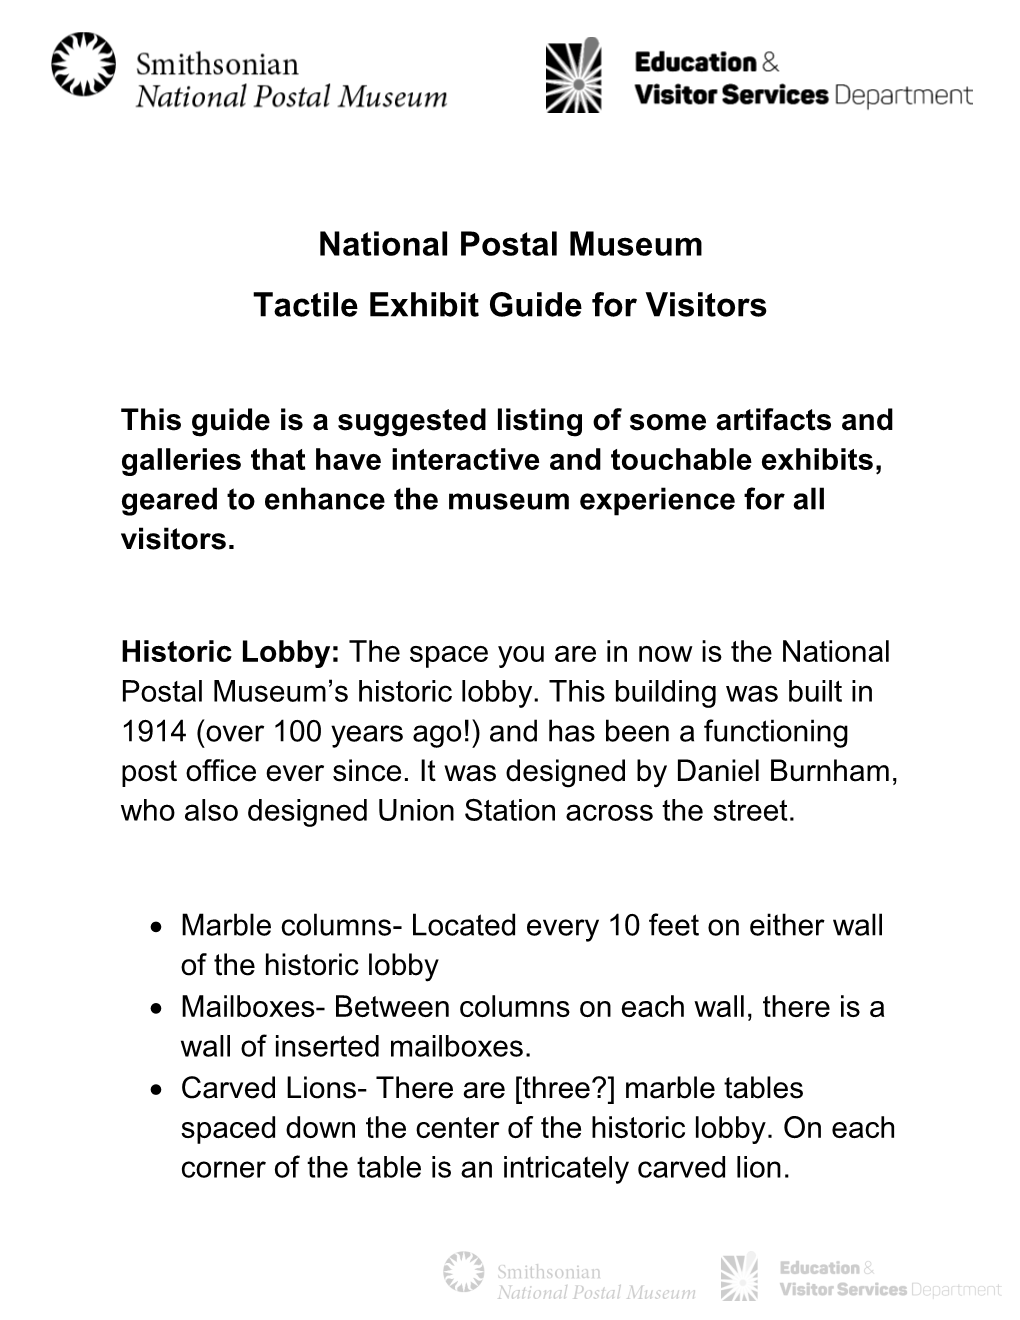 Tactile Exhibit Guide for Visitors